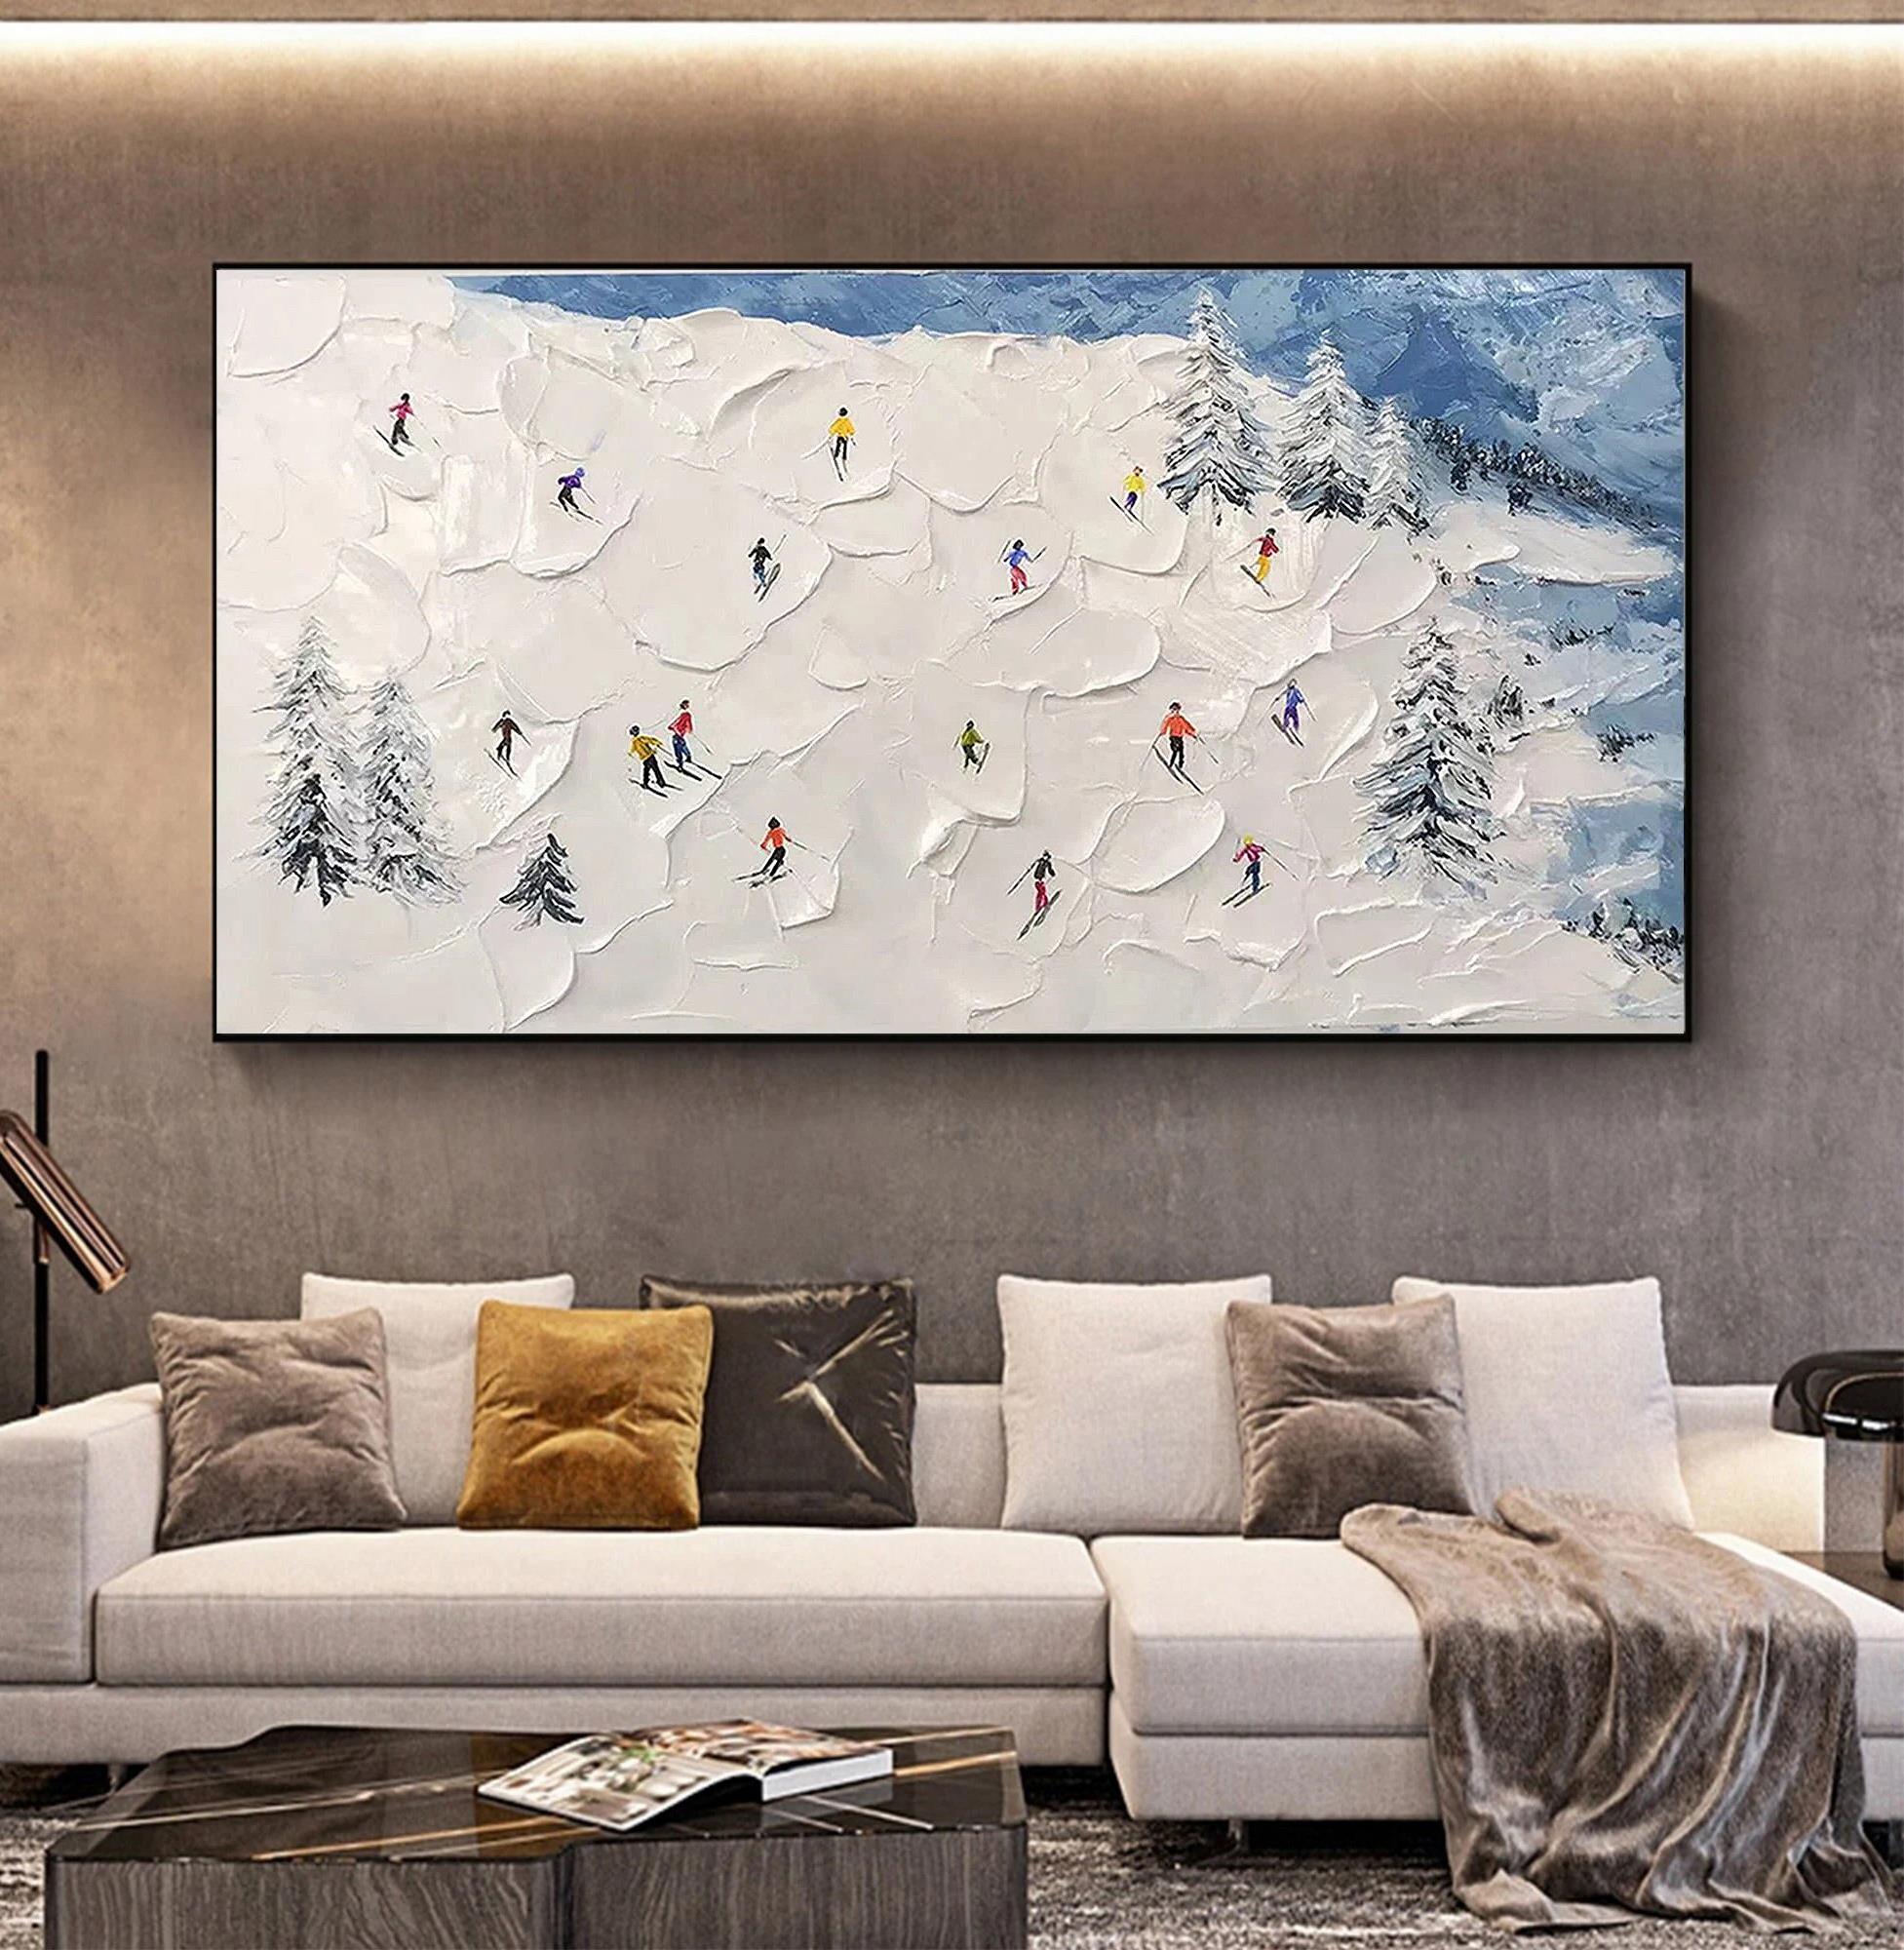 Skier on Snowy Mountain Wall Art Sport White Snow Skiing Room Decor by Knife 09 Oil Paintings